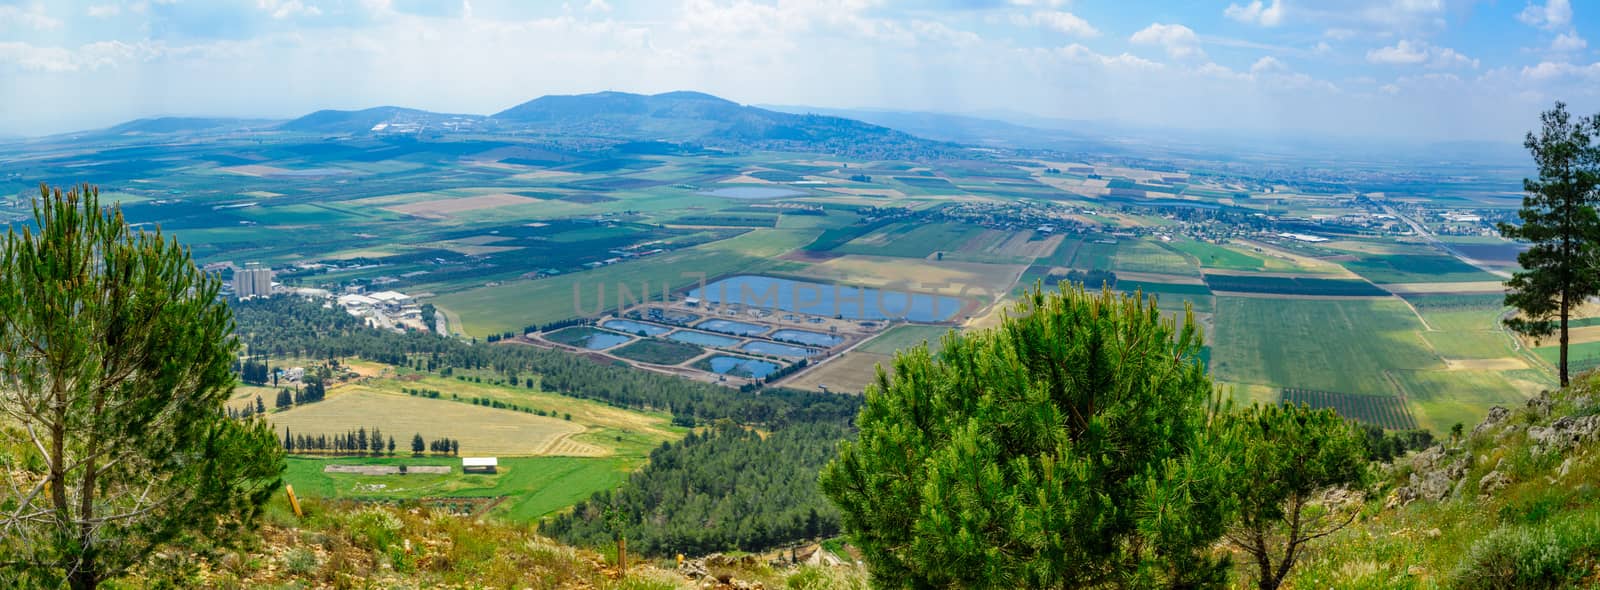 Panorama of the Jezreel Valley landscape, viewed from Mount Precipice. Northern Israel